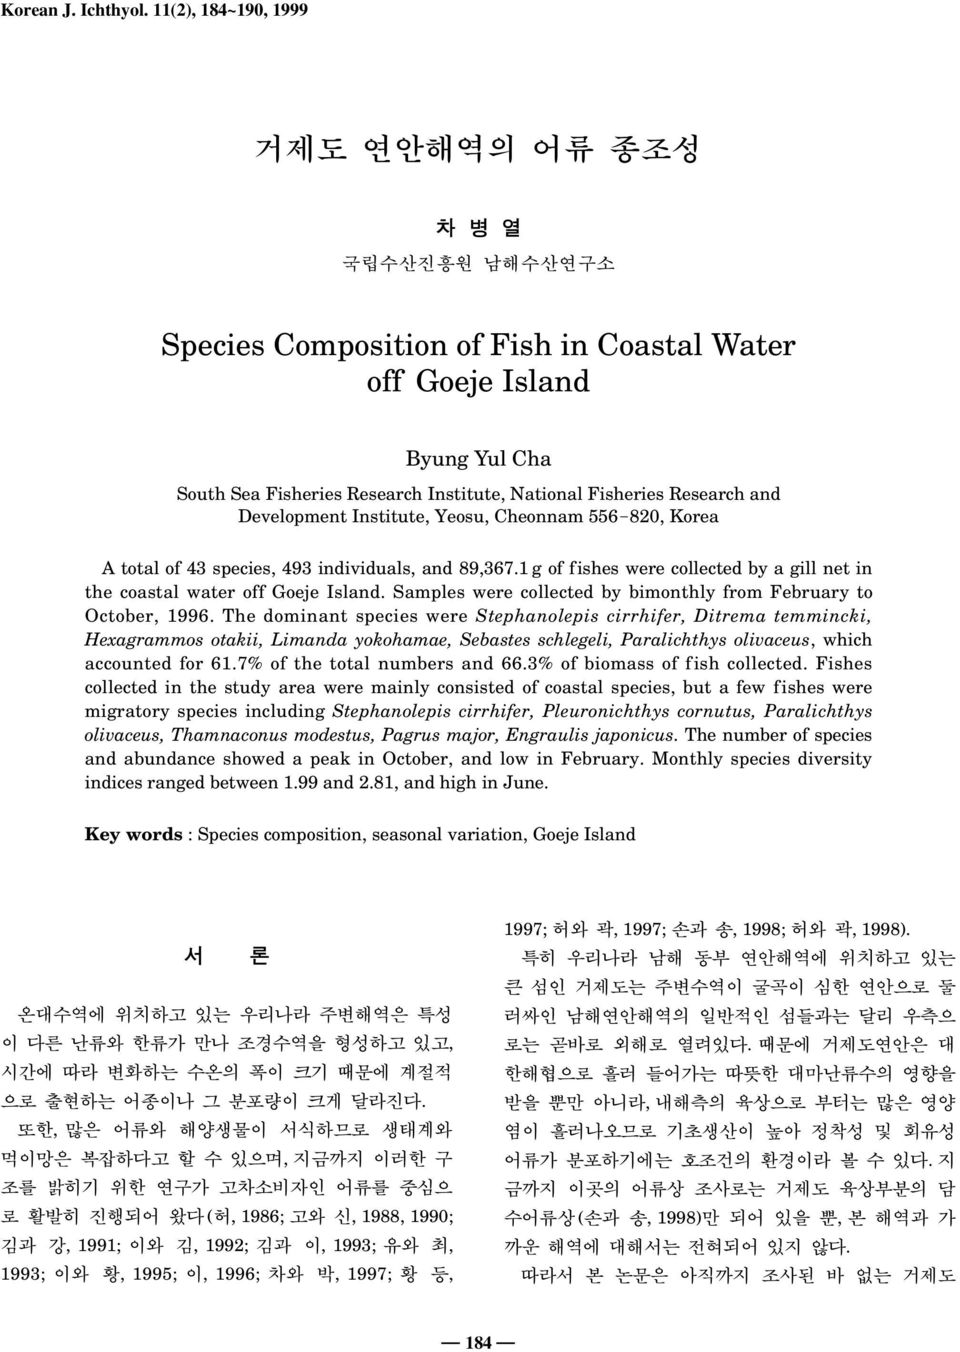 Research and Development Institute, Yeosu, Cheonnam 556-820, Korea A total of 43 species, 493 individuals, and 89,367.1 g of fishes were collected by a gill net in the coastal water off Goeje Island.